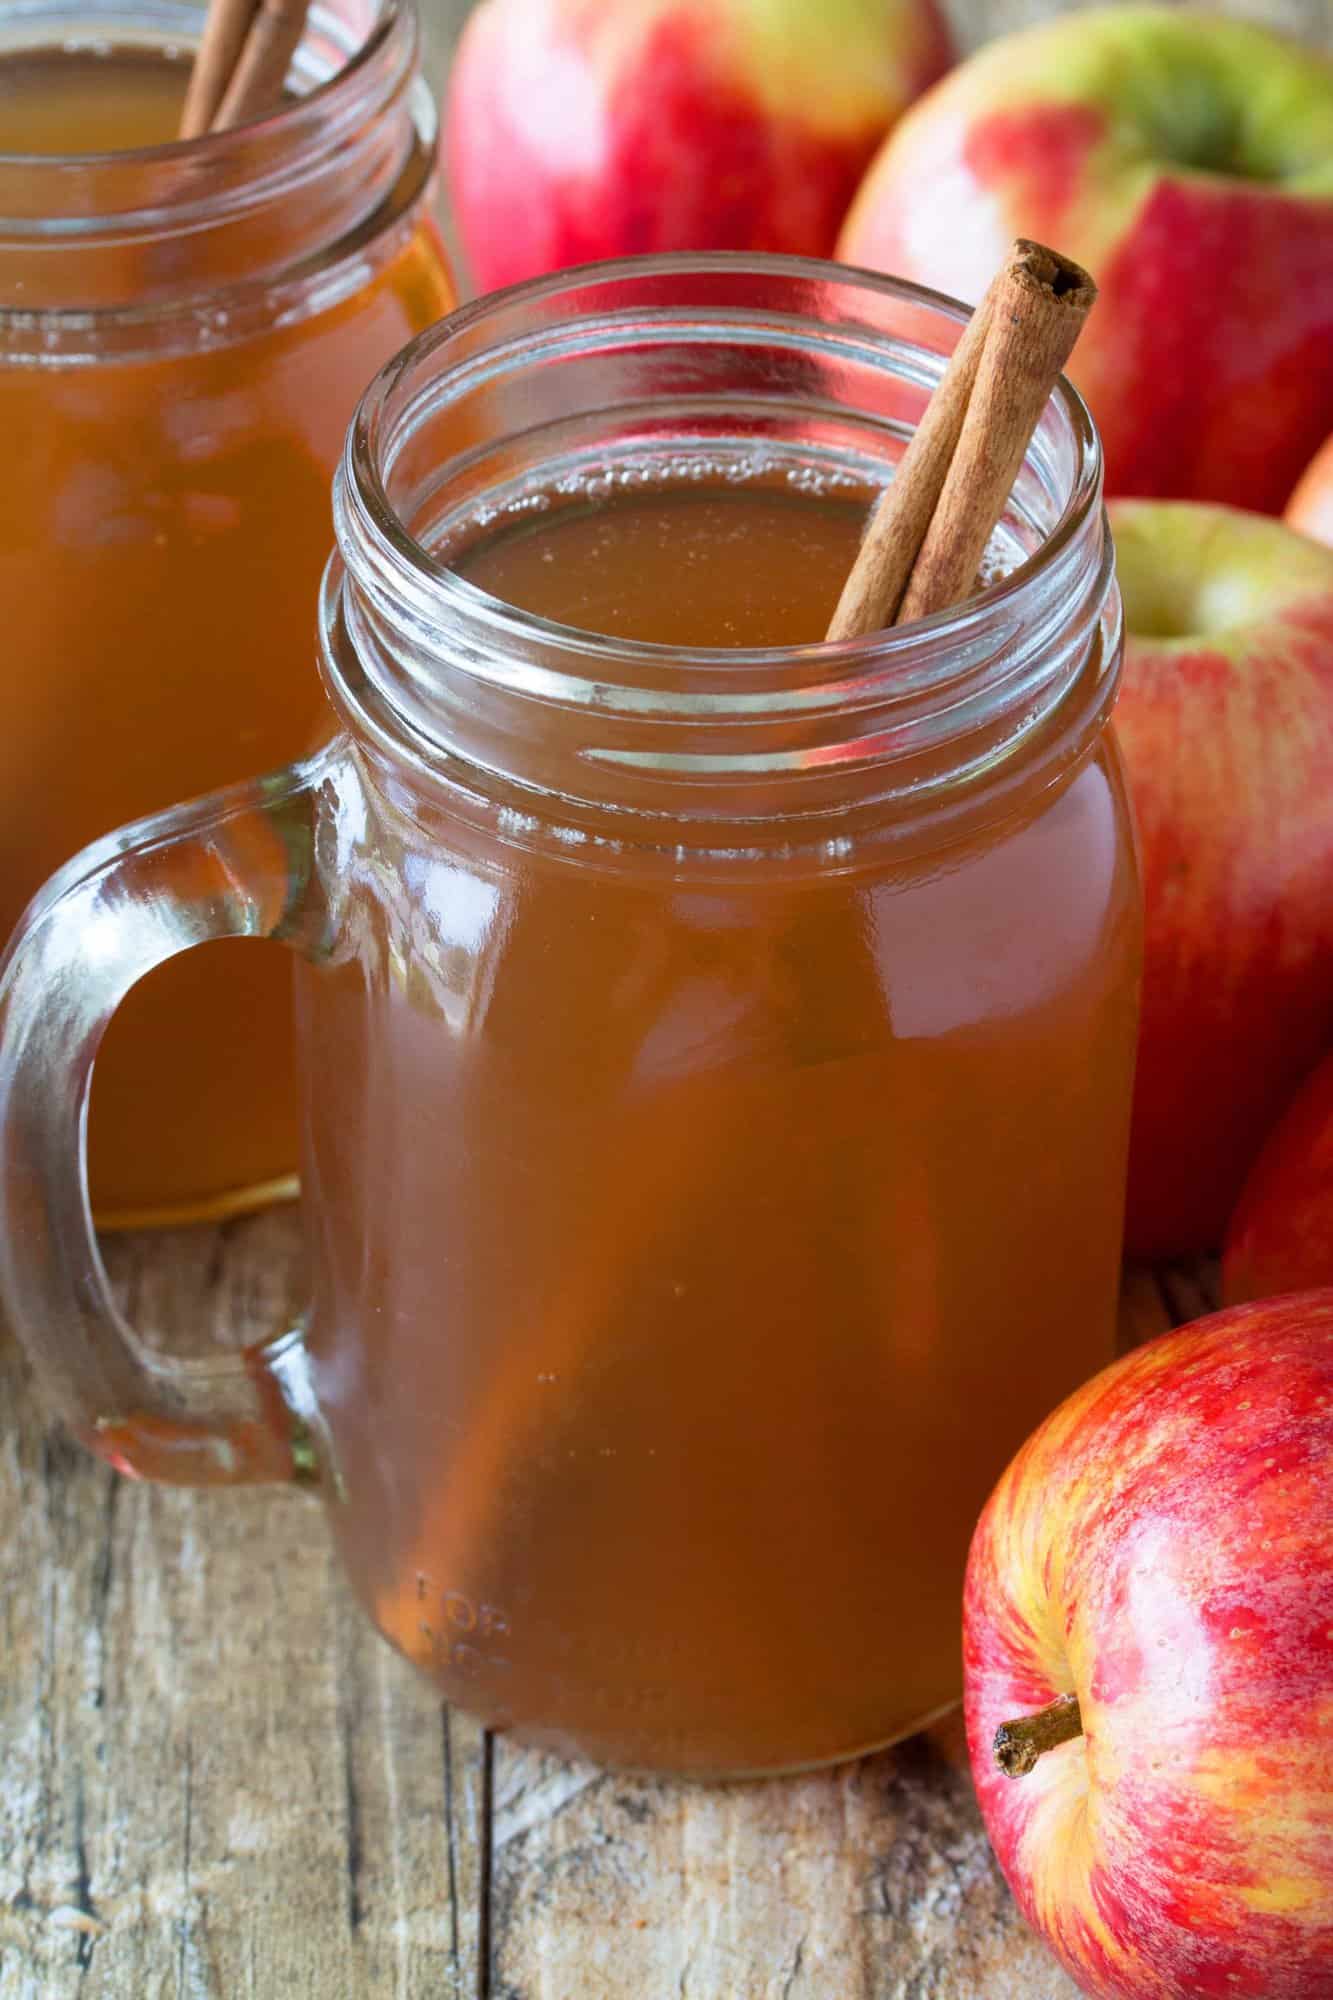 Cuddle up and stay warm with a mug of spiced apple cider. This Slow Cooker Apple Cider is made from scratch and can be frozen to enjoy all winter long!